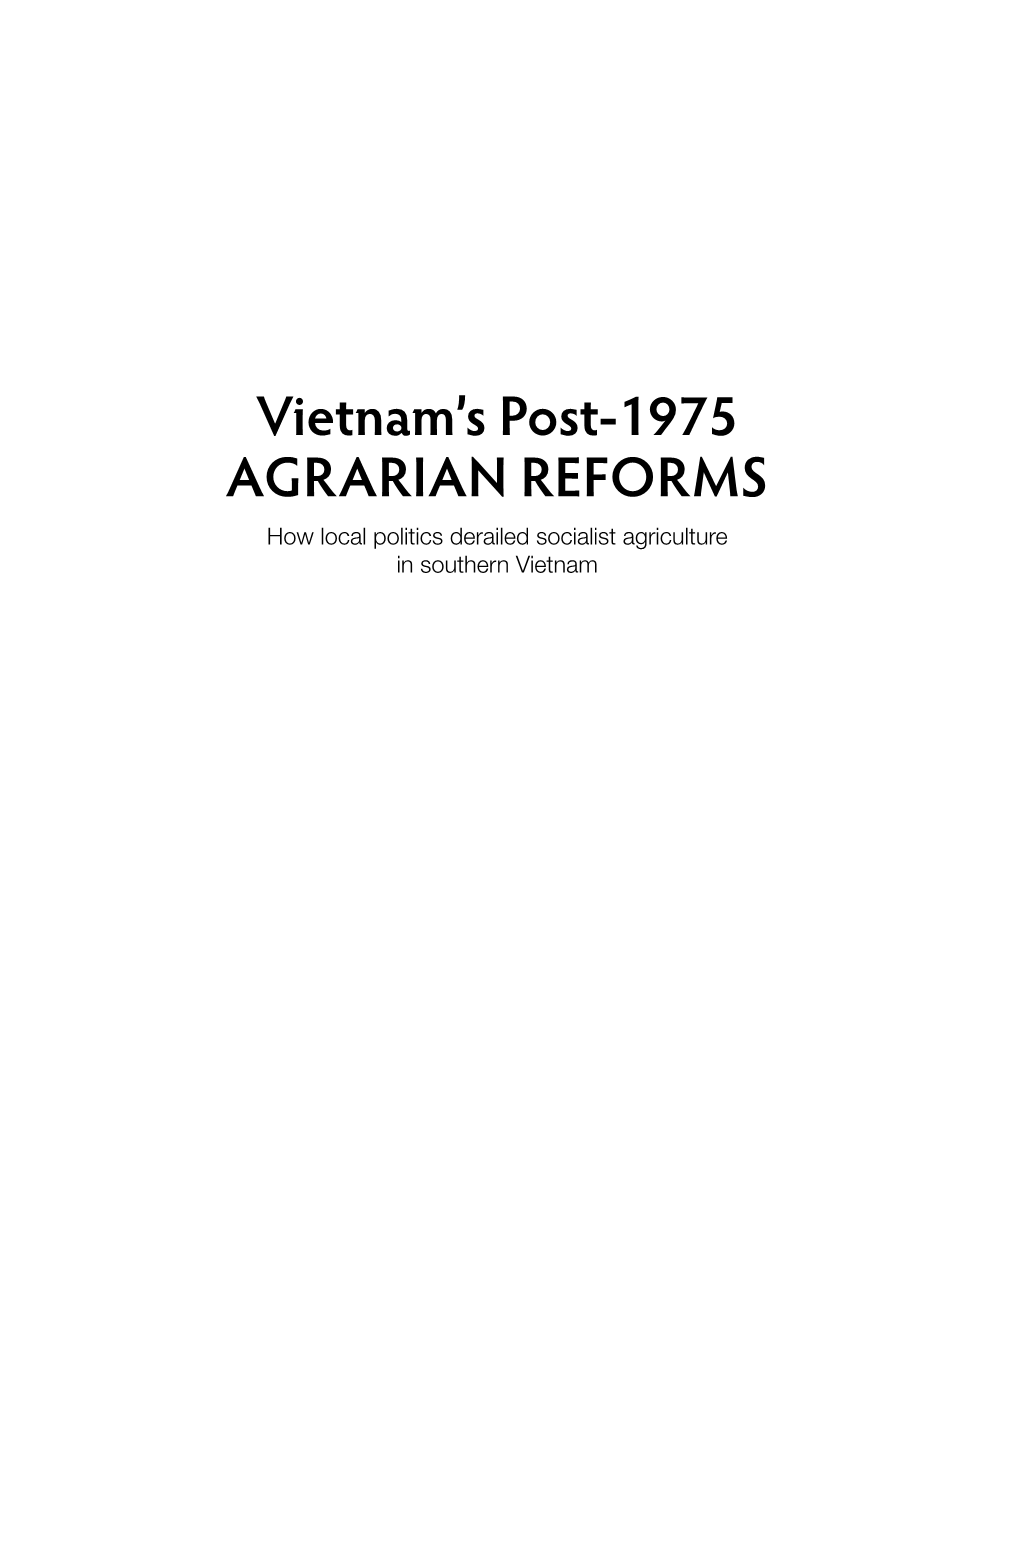 Vietnam's Post-1975 Agrarian Reforms: How Local Politics Derailed Socialist Agriculture in Southern Vietnam